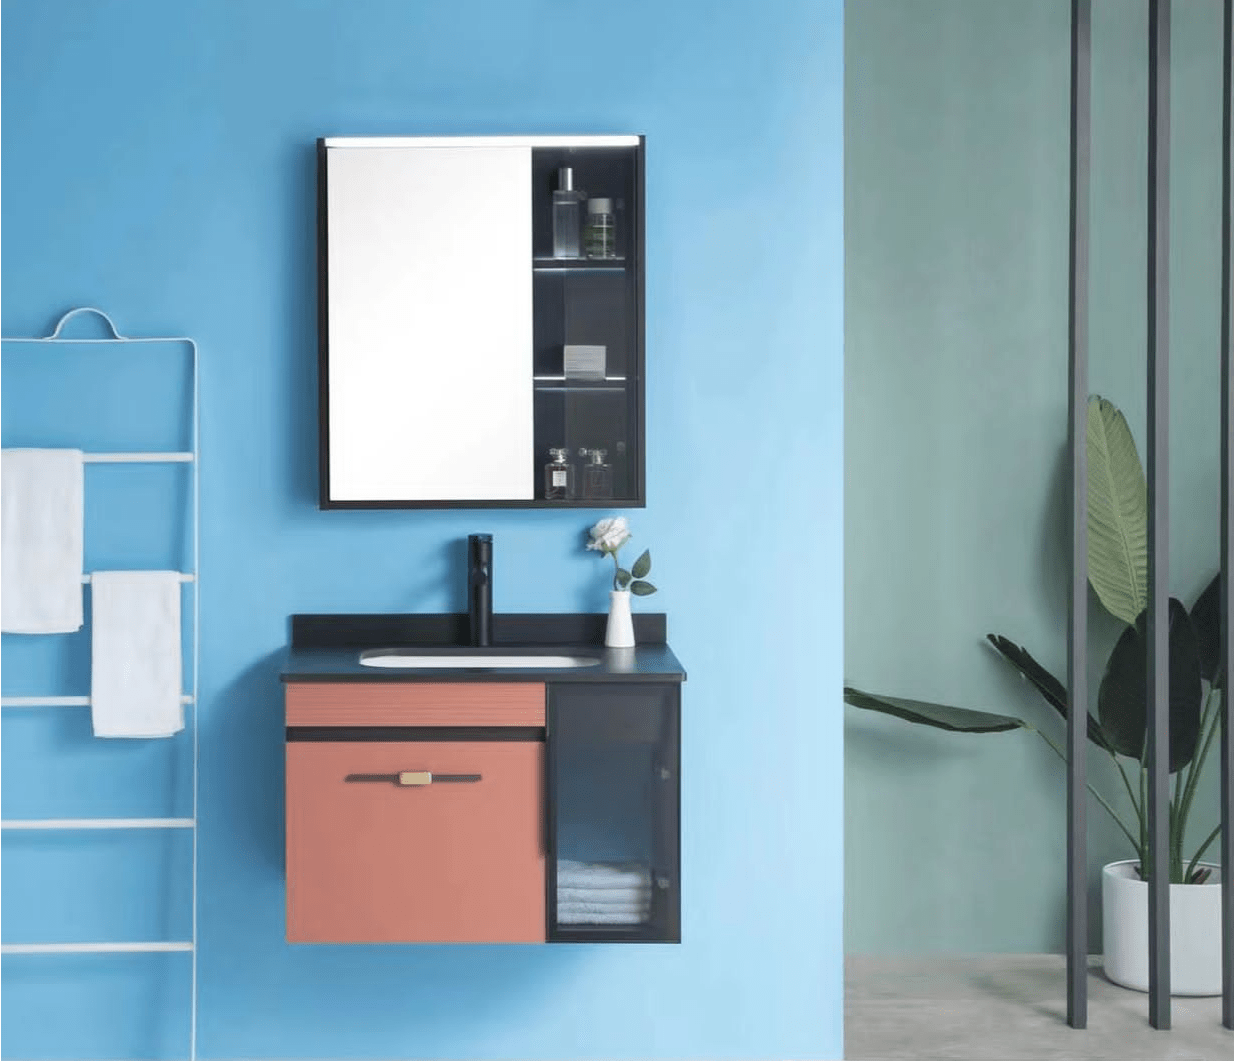 Buy Bathroom Luxury 80cm Wall-Mounted Vanity Cabinet with Mirror - WK-K-9854 | Shop at Supply Master Accra, Ghana Bathroom Vanity & Cabinets Buy Tools hardware Building materials